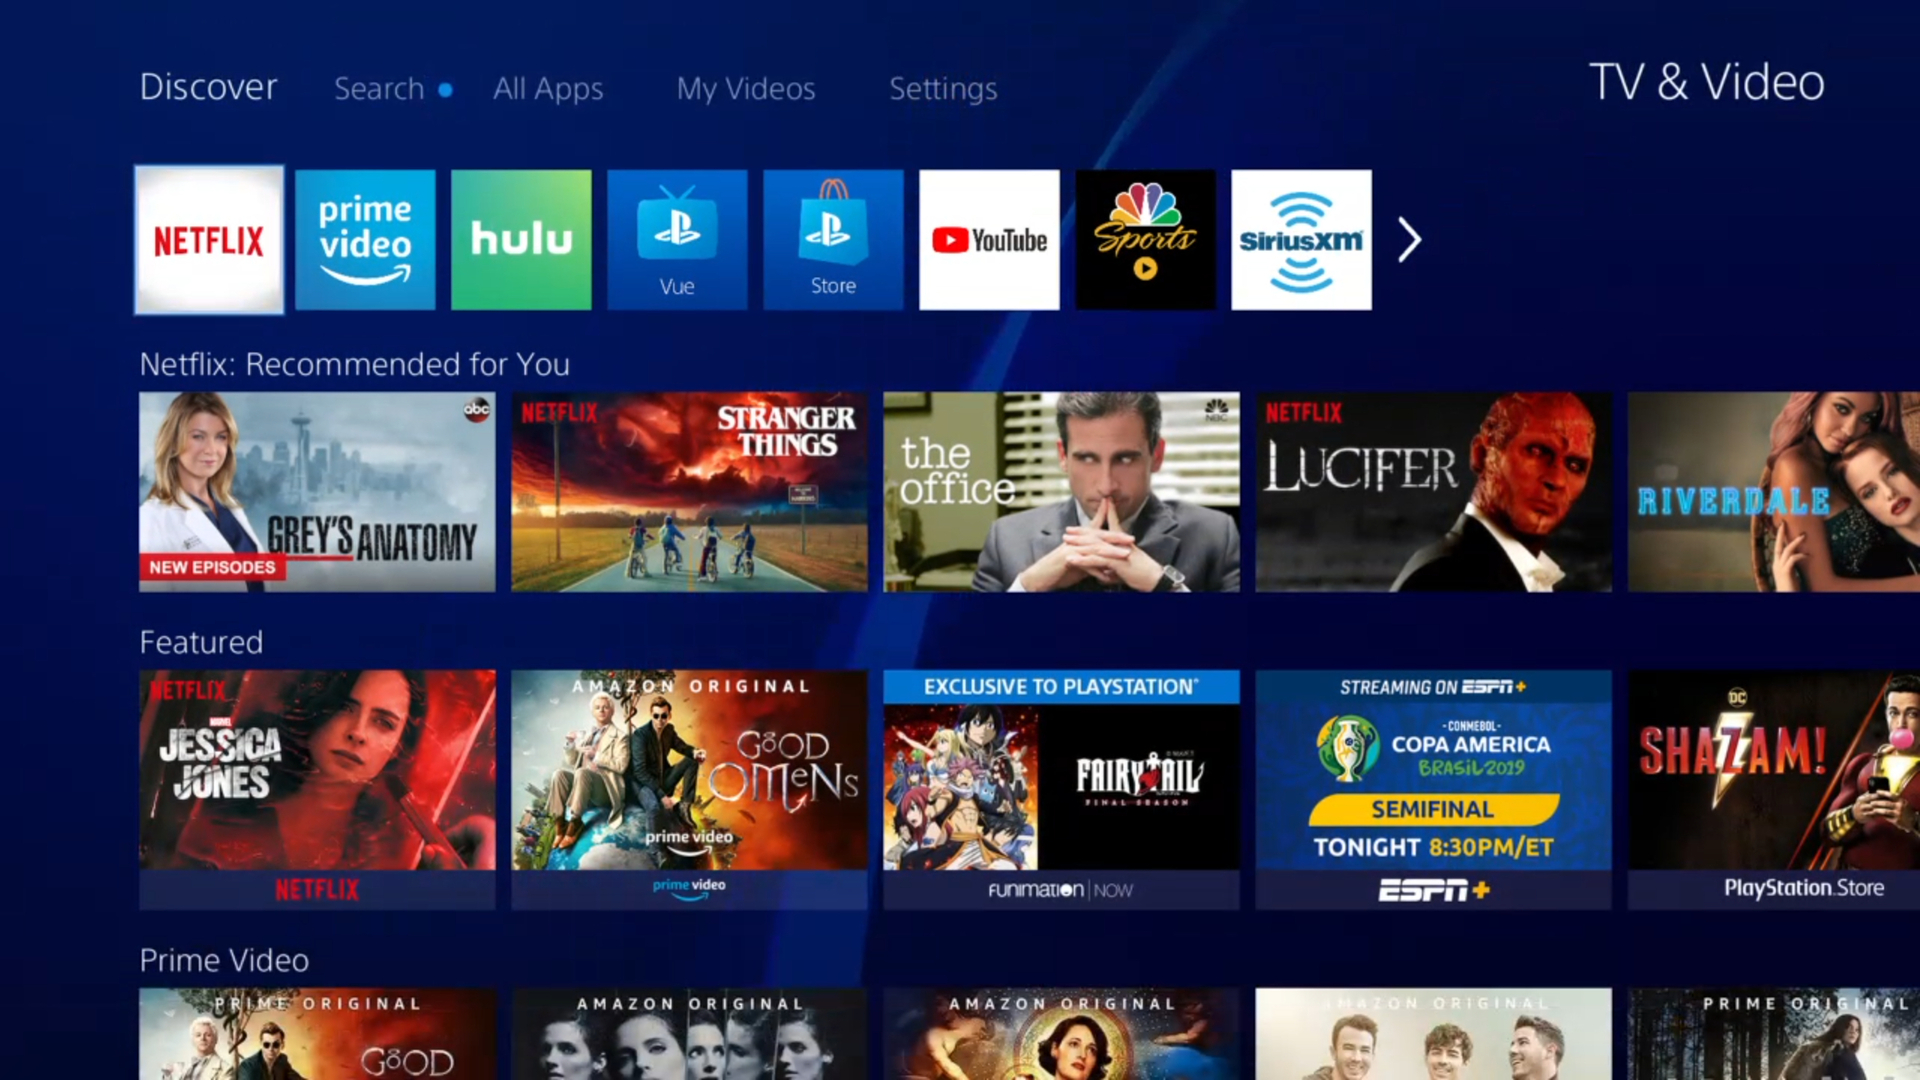 How to get Netflix on PlayStation 4